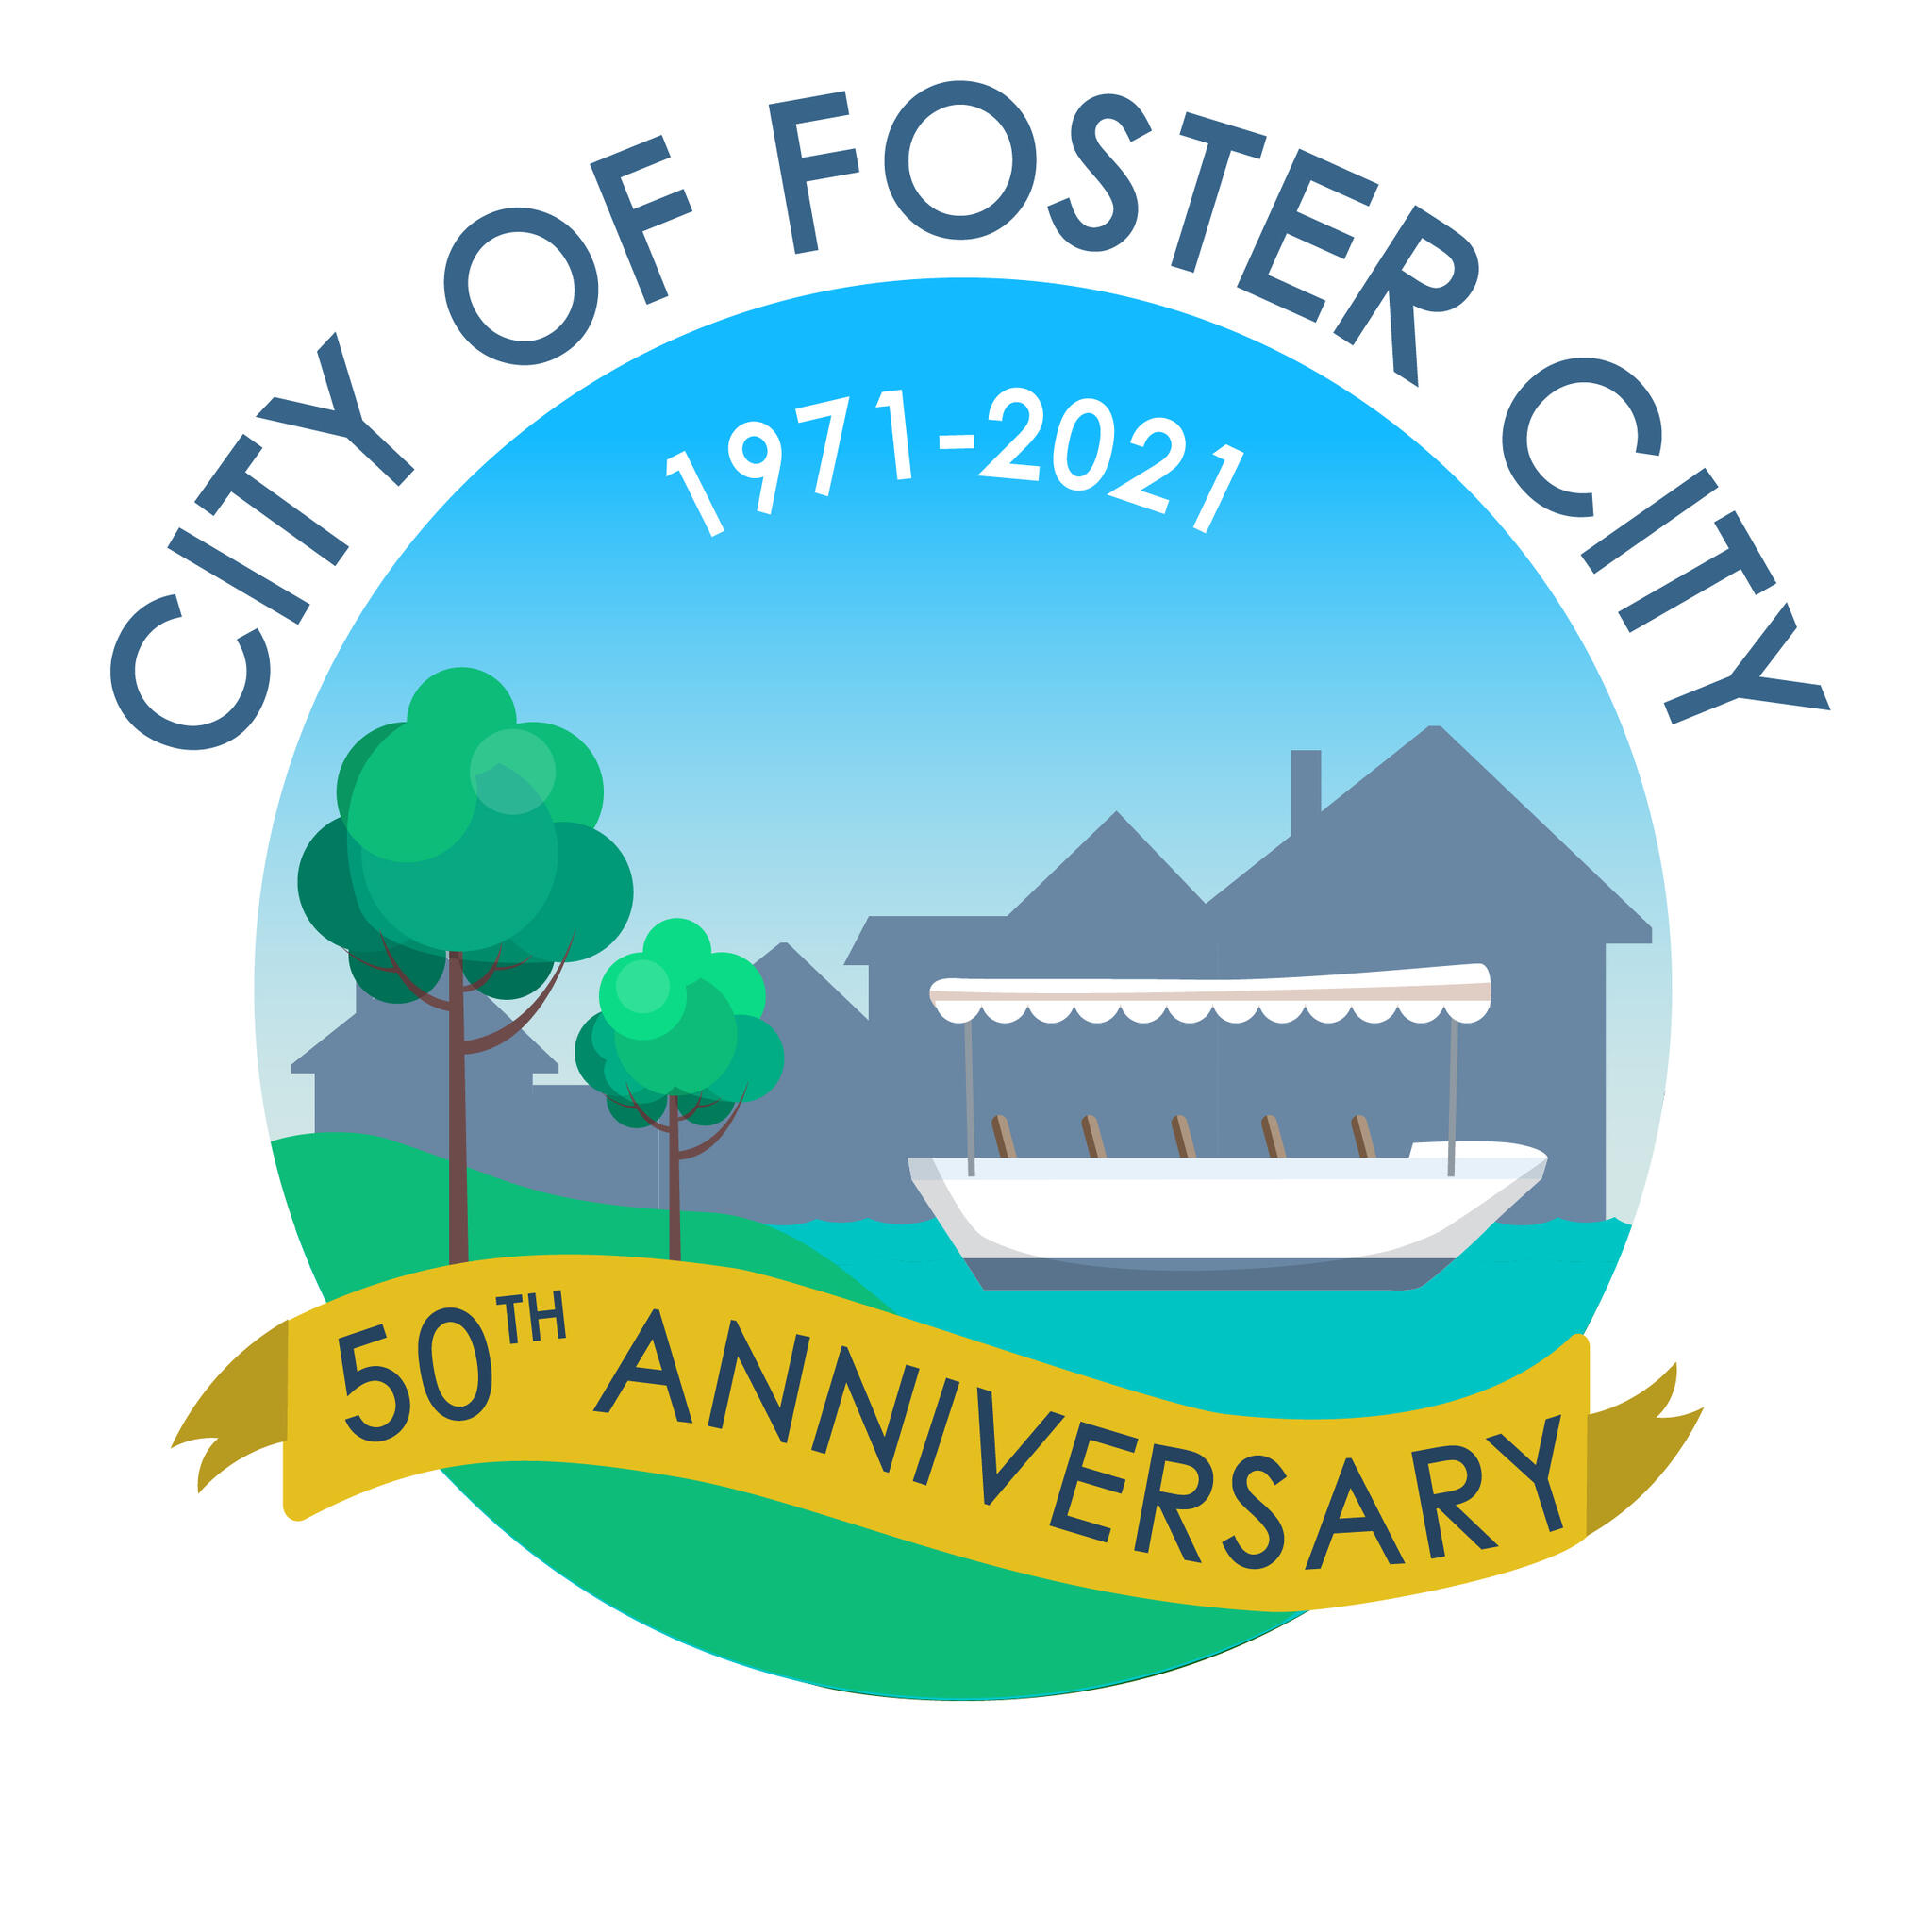 City of Foster City and Gilead Sciences Reconfirm Commitment to